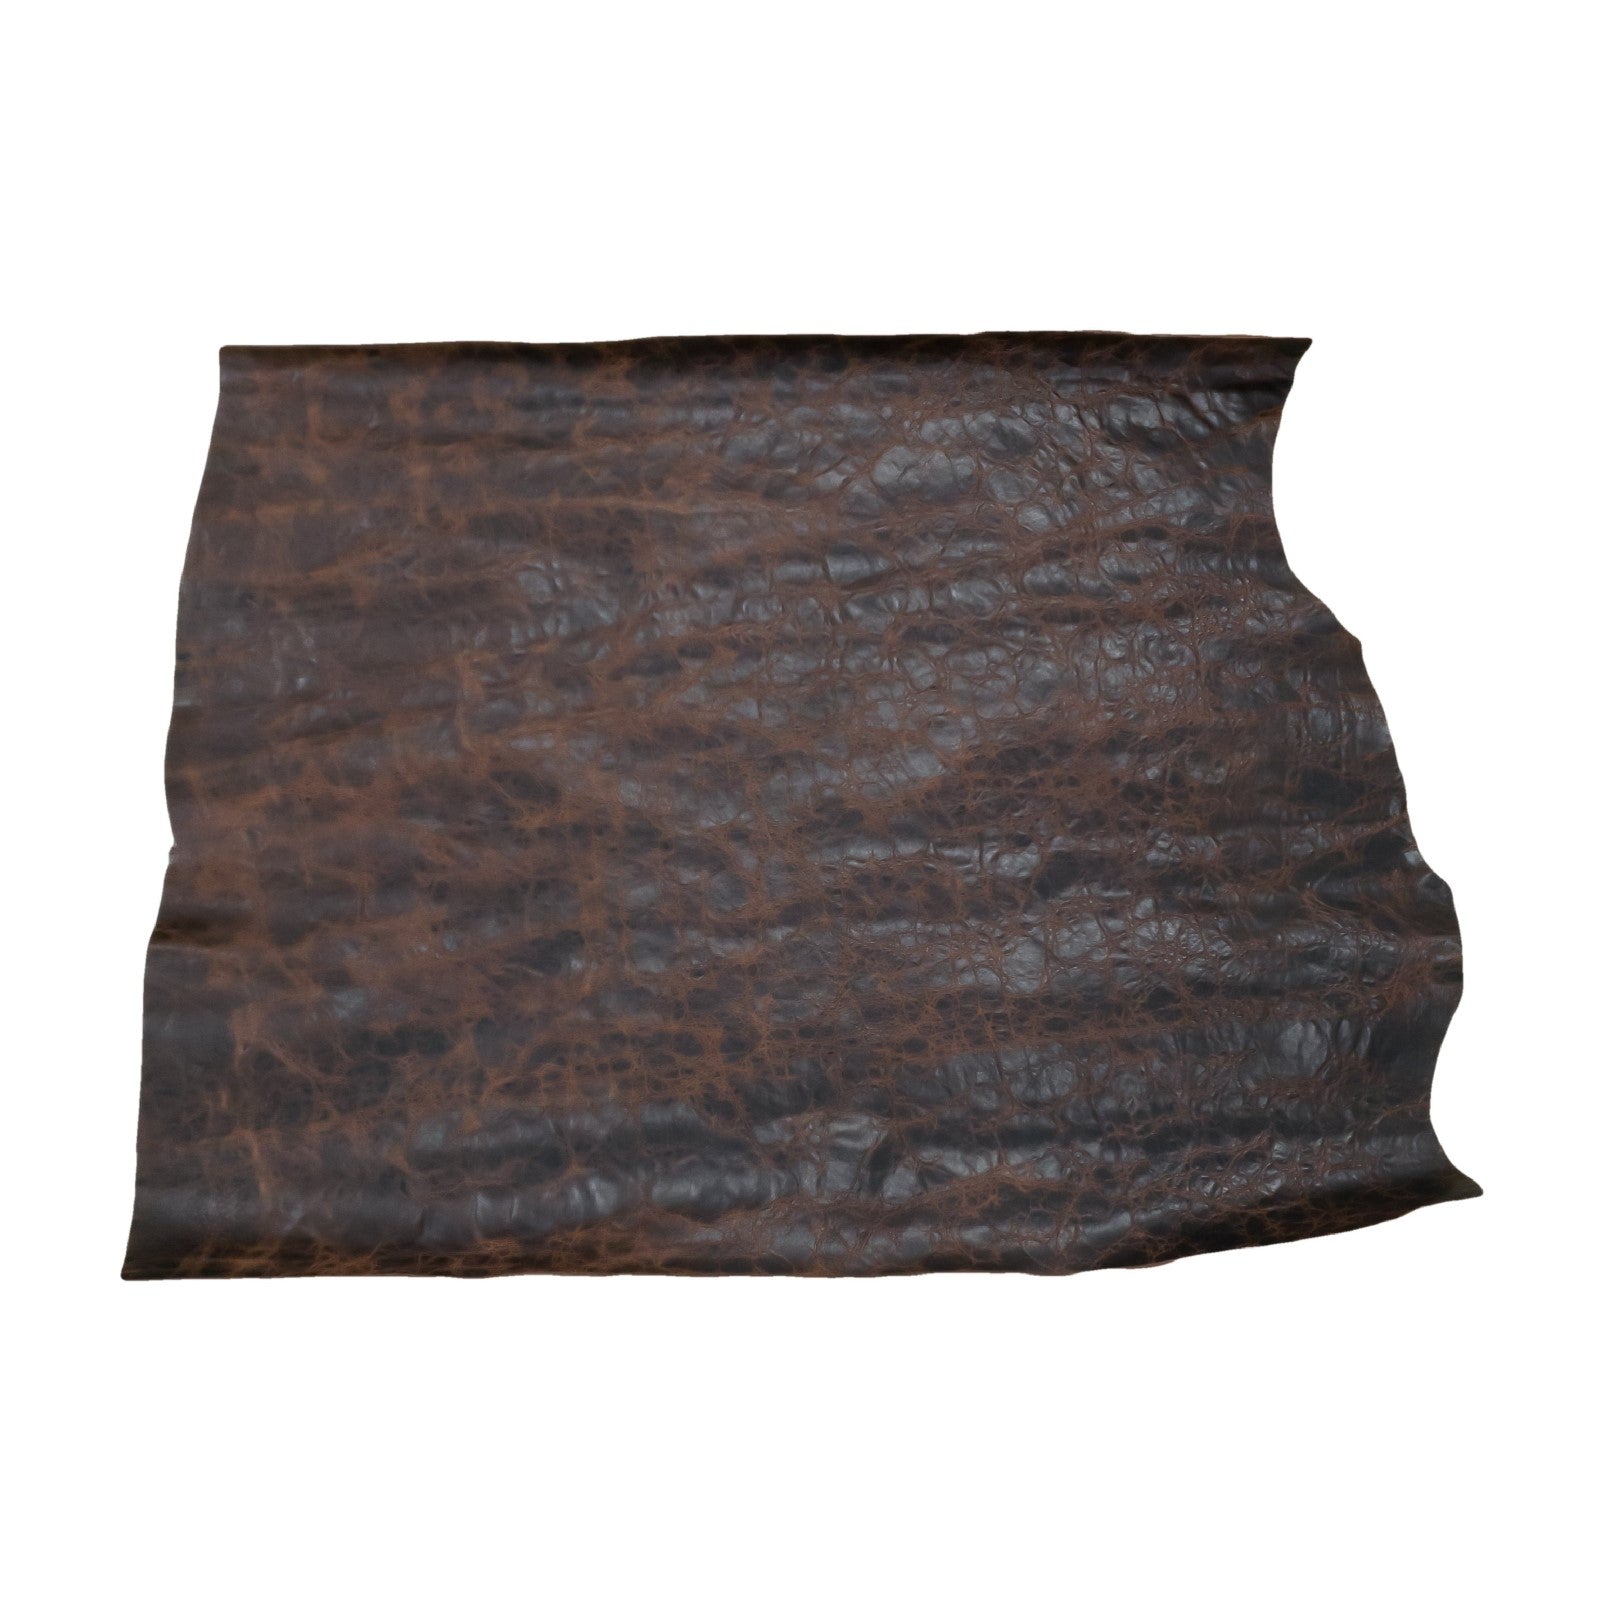 Horseback Brown, 6.5-26 SqFt, 3-4 oz, Cow Sides & Pieces, Longhorn, 6.5-7.5 / Project Piece (Middle) | The Leather Guy